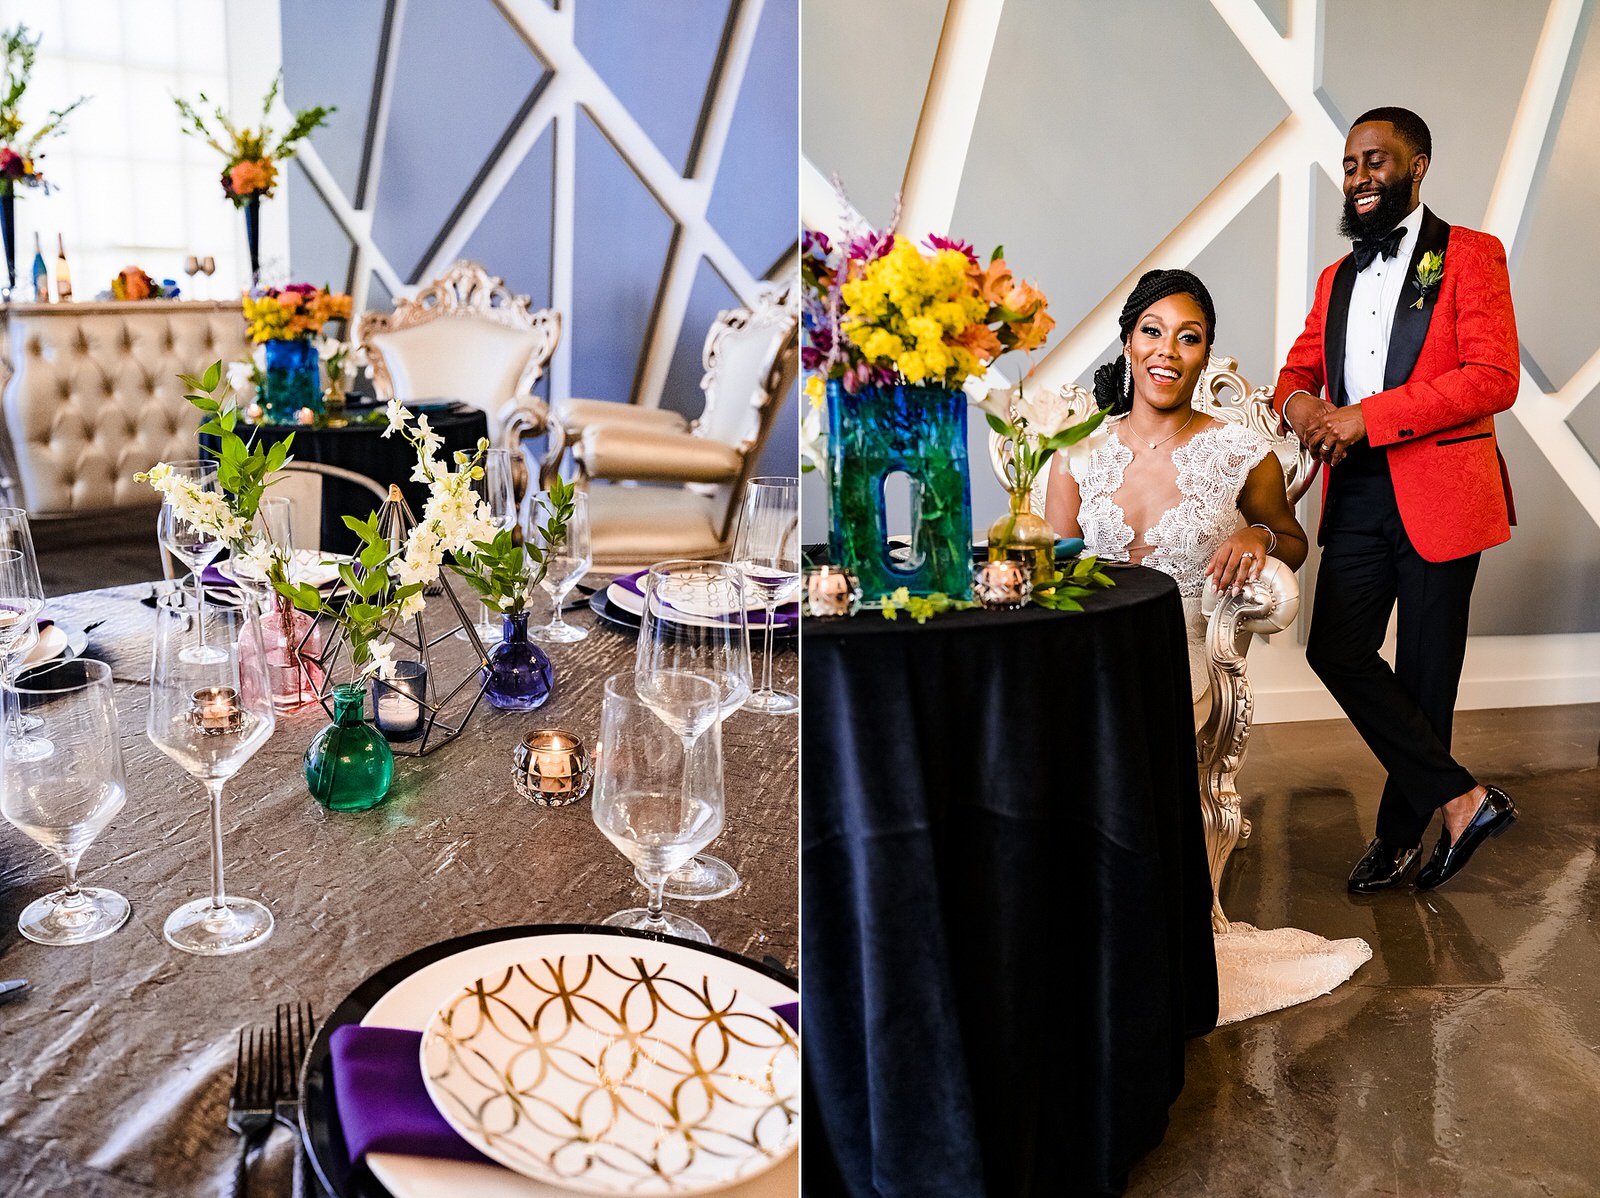 Lucky Strike Suite set up for an intimate wedding as part of a colorful wedding inspiration shoot